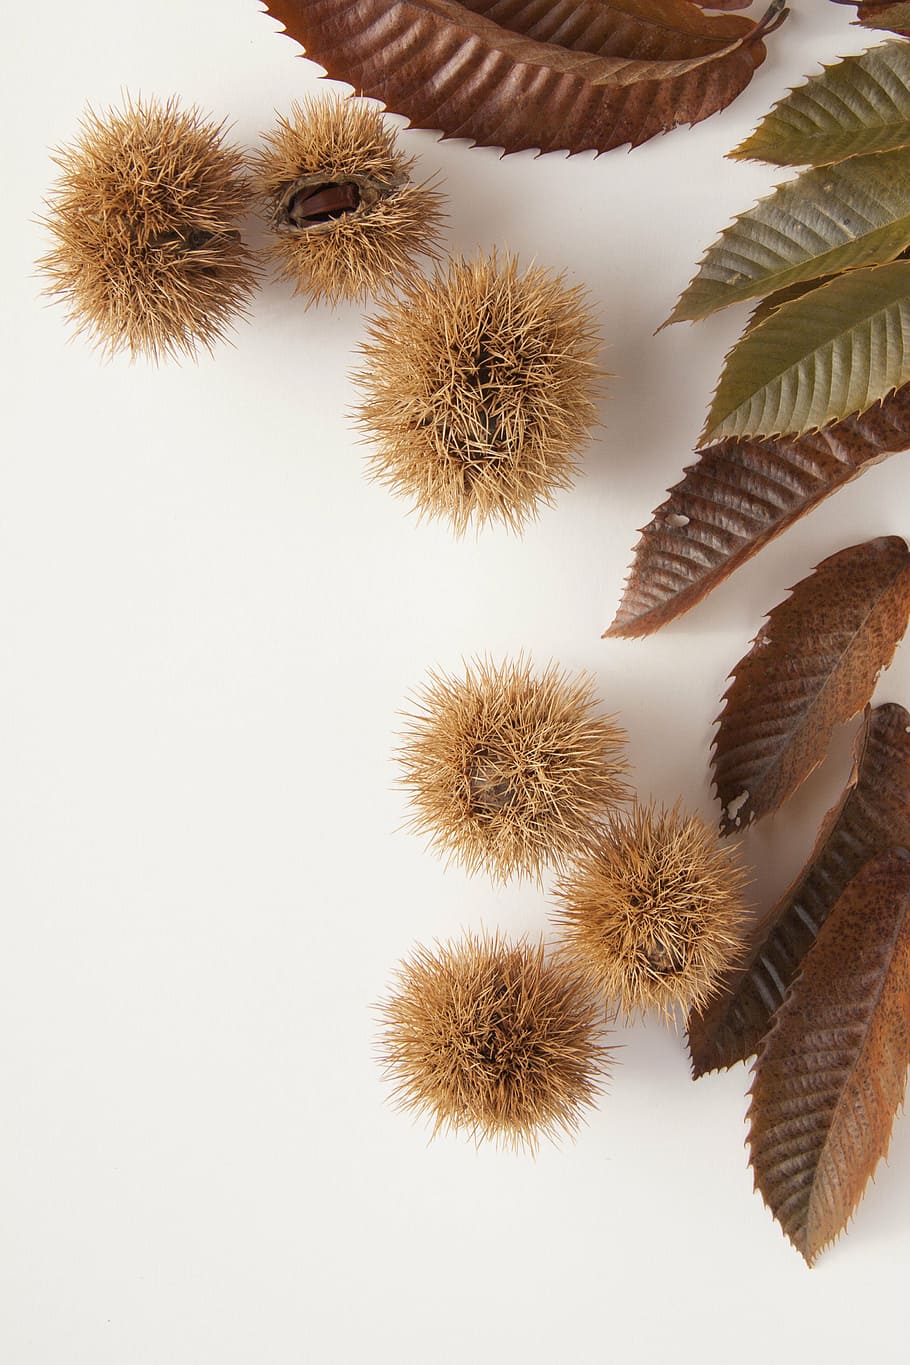 six, brown, spiky fruits, sweet chestnuts, chestnuts, nature, autumn, delicious, eat, food